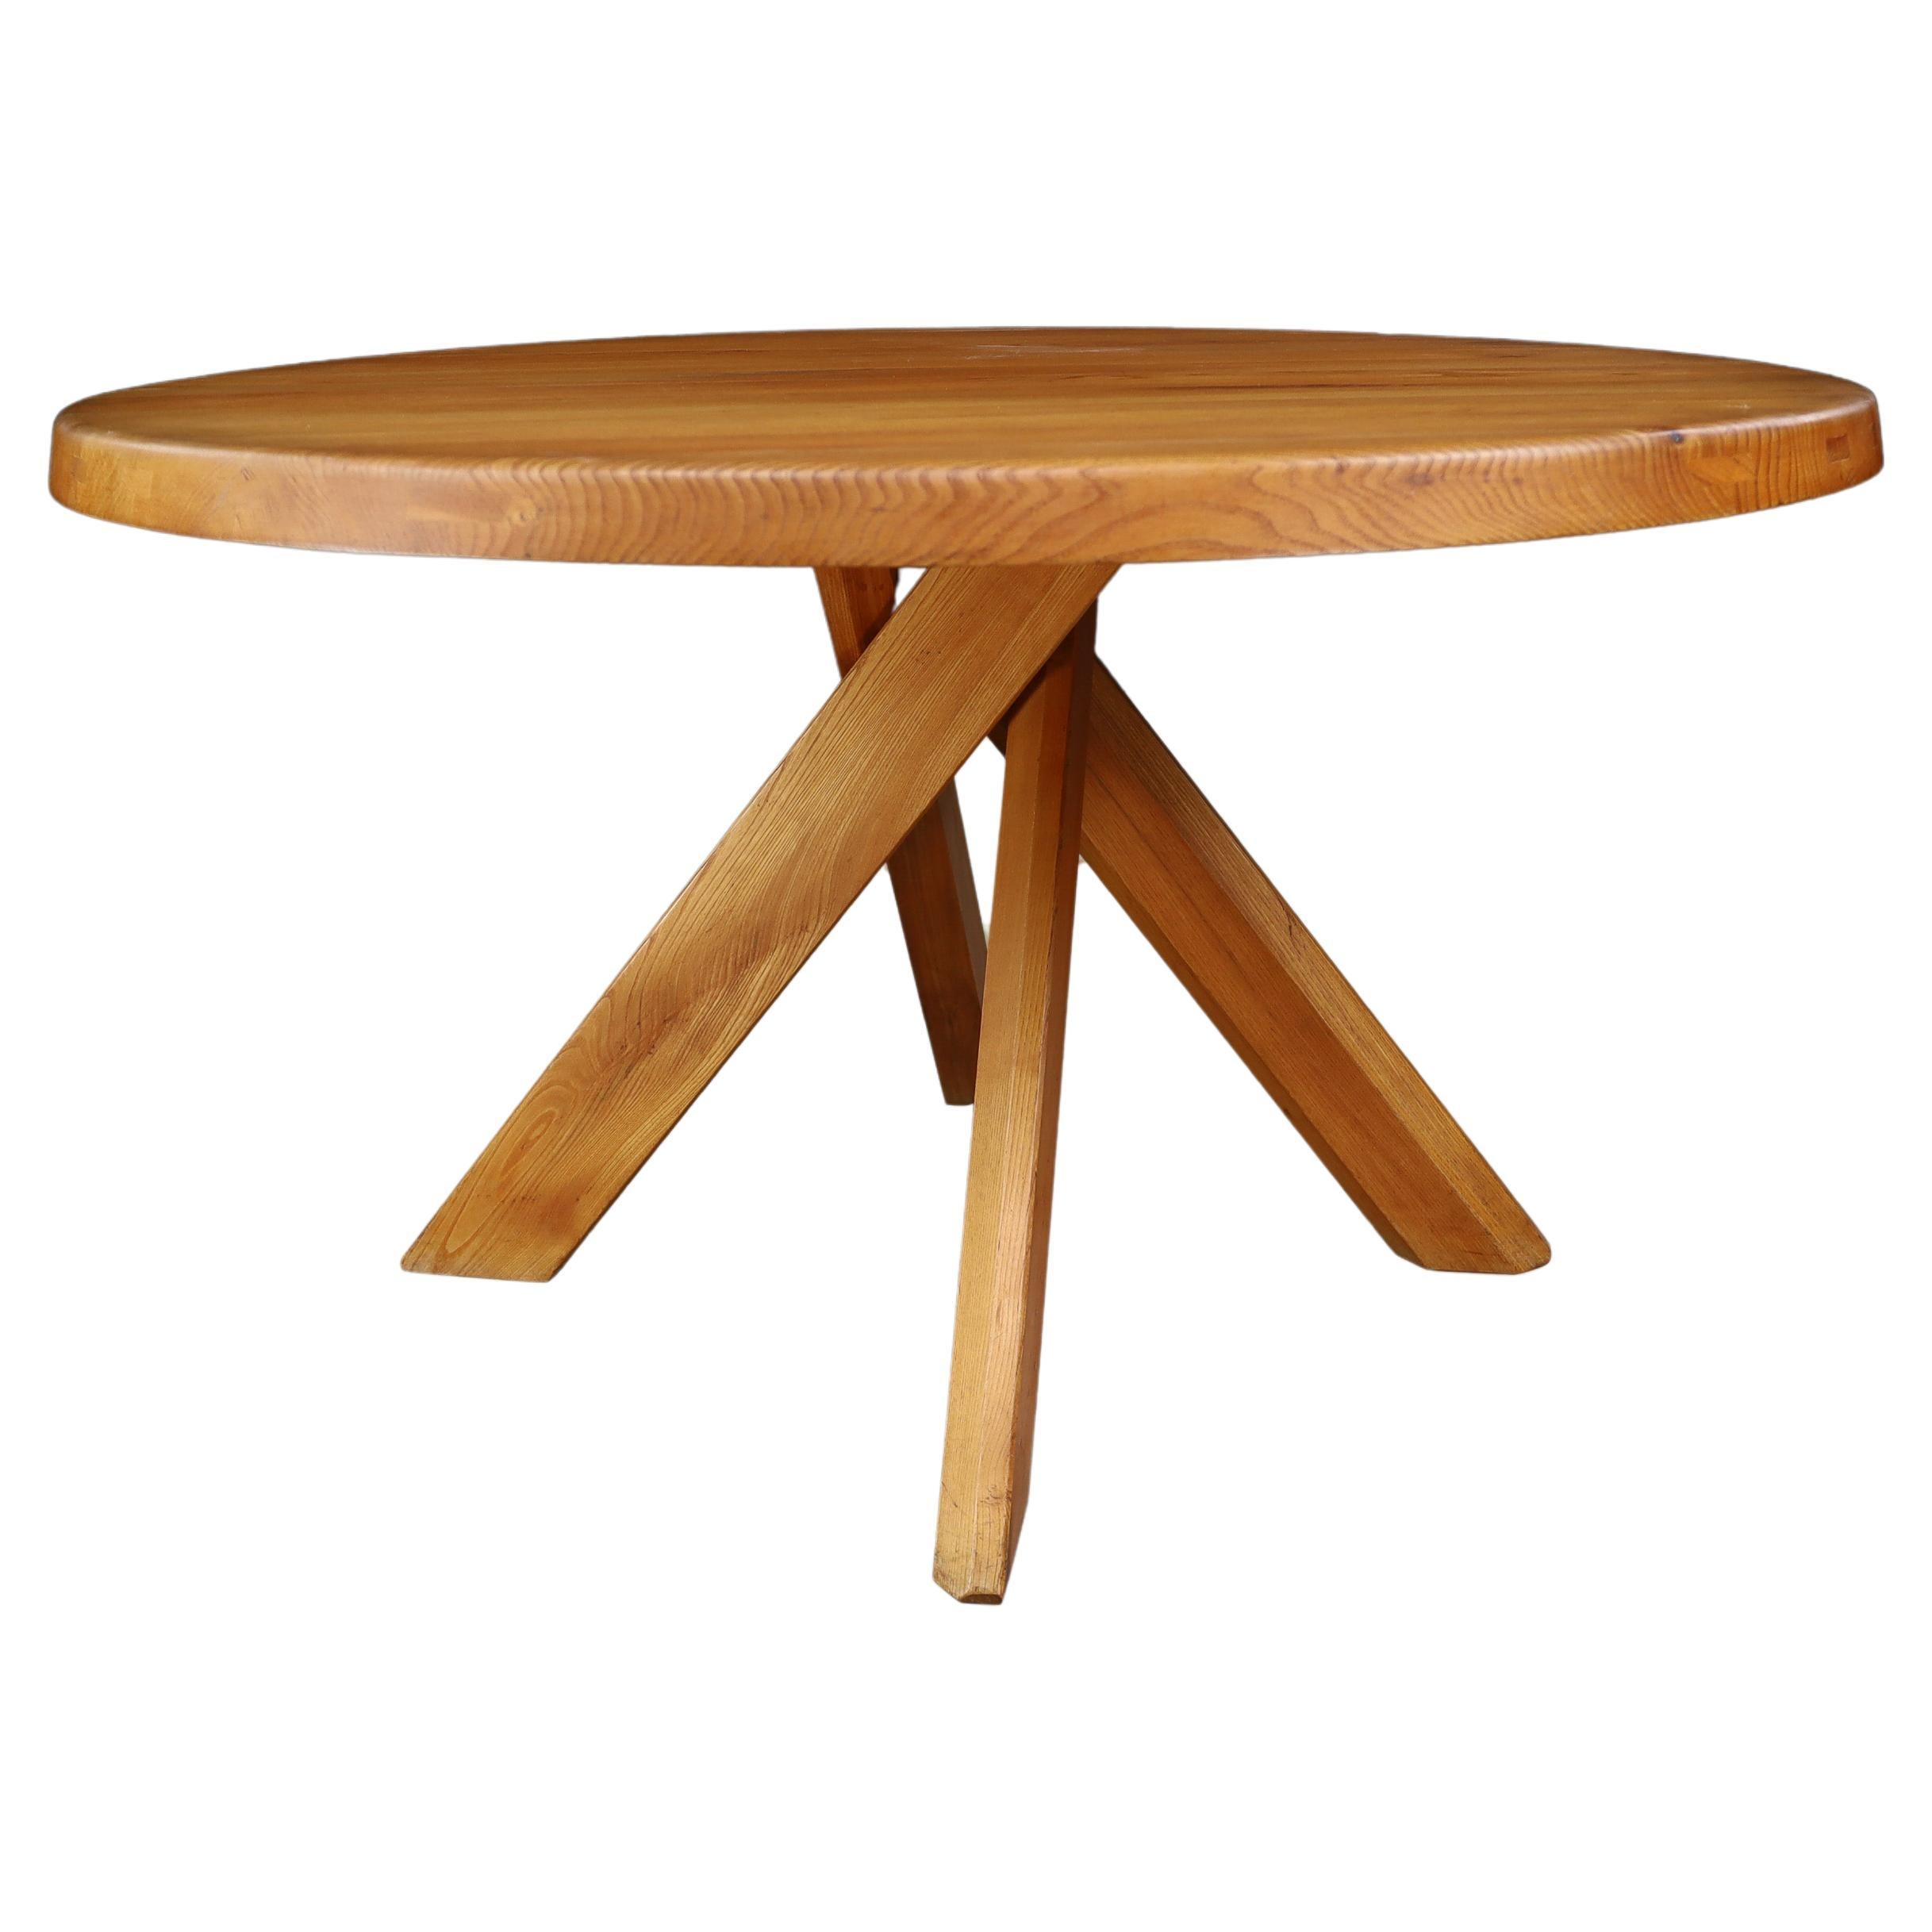 Pierre Chapo 'T21C' Sfax Round Dining Table made of Solid Elm, France 1969 For Sale